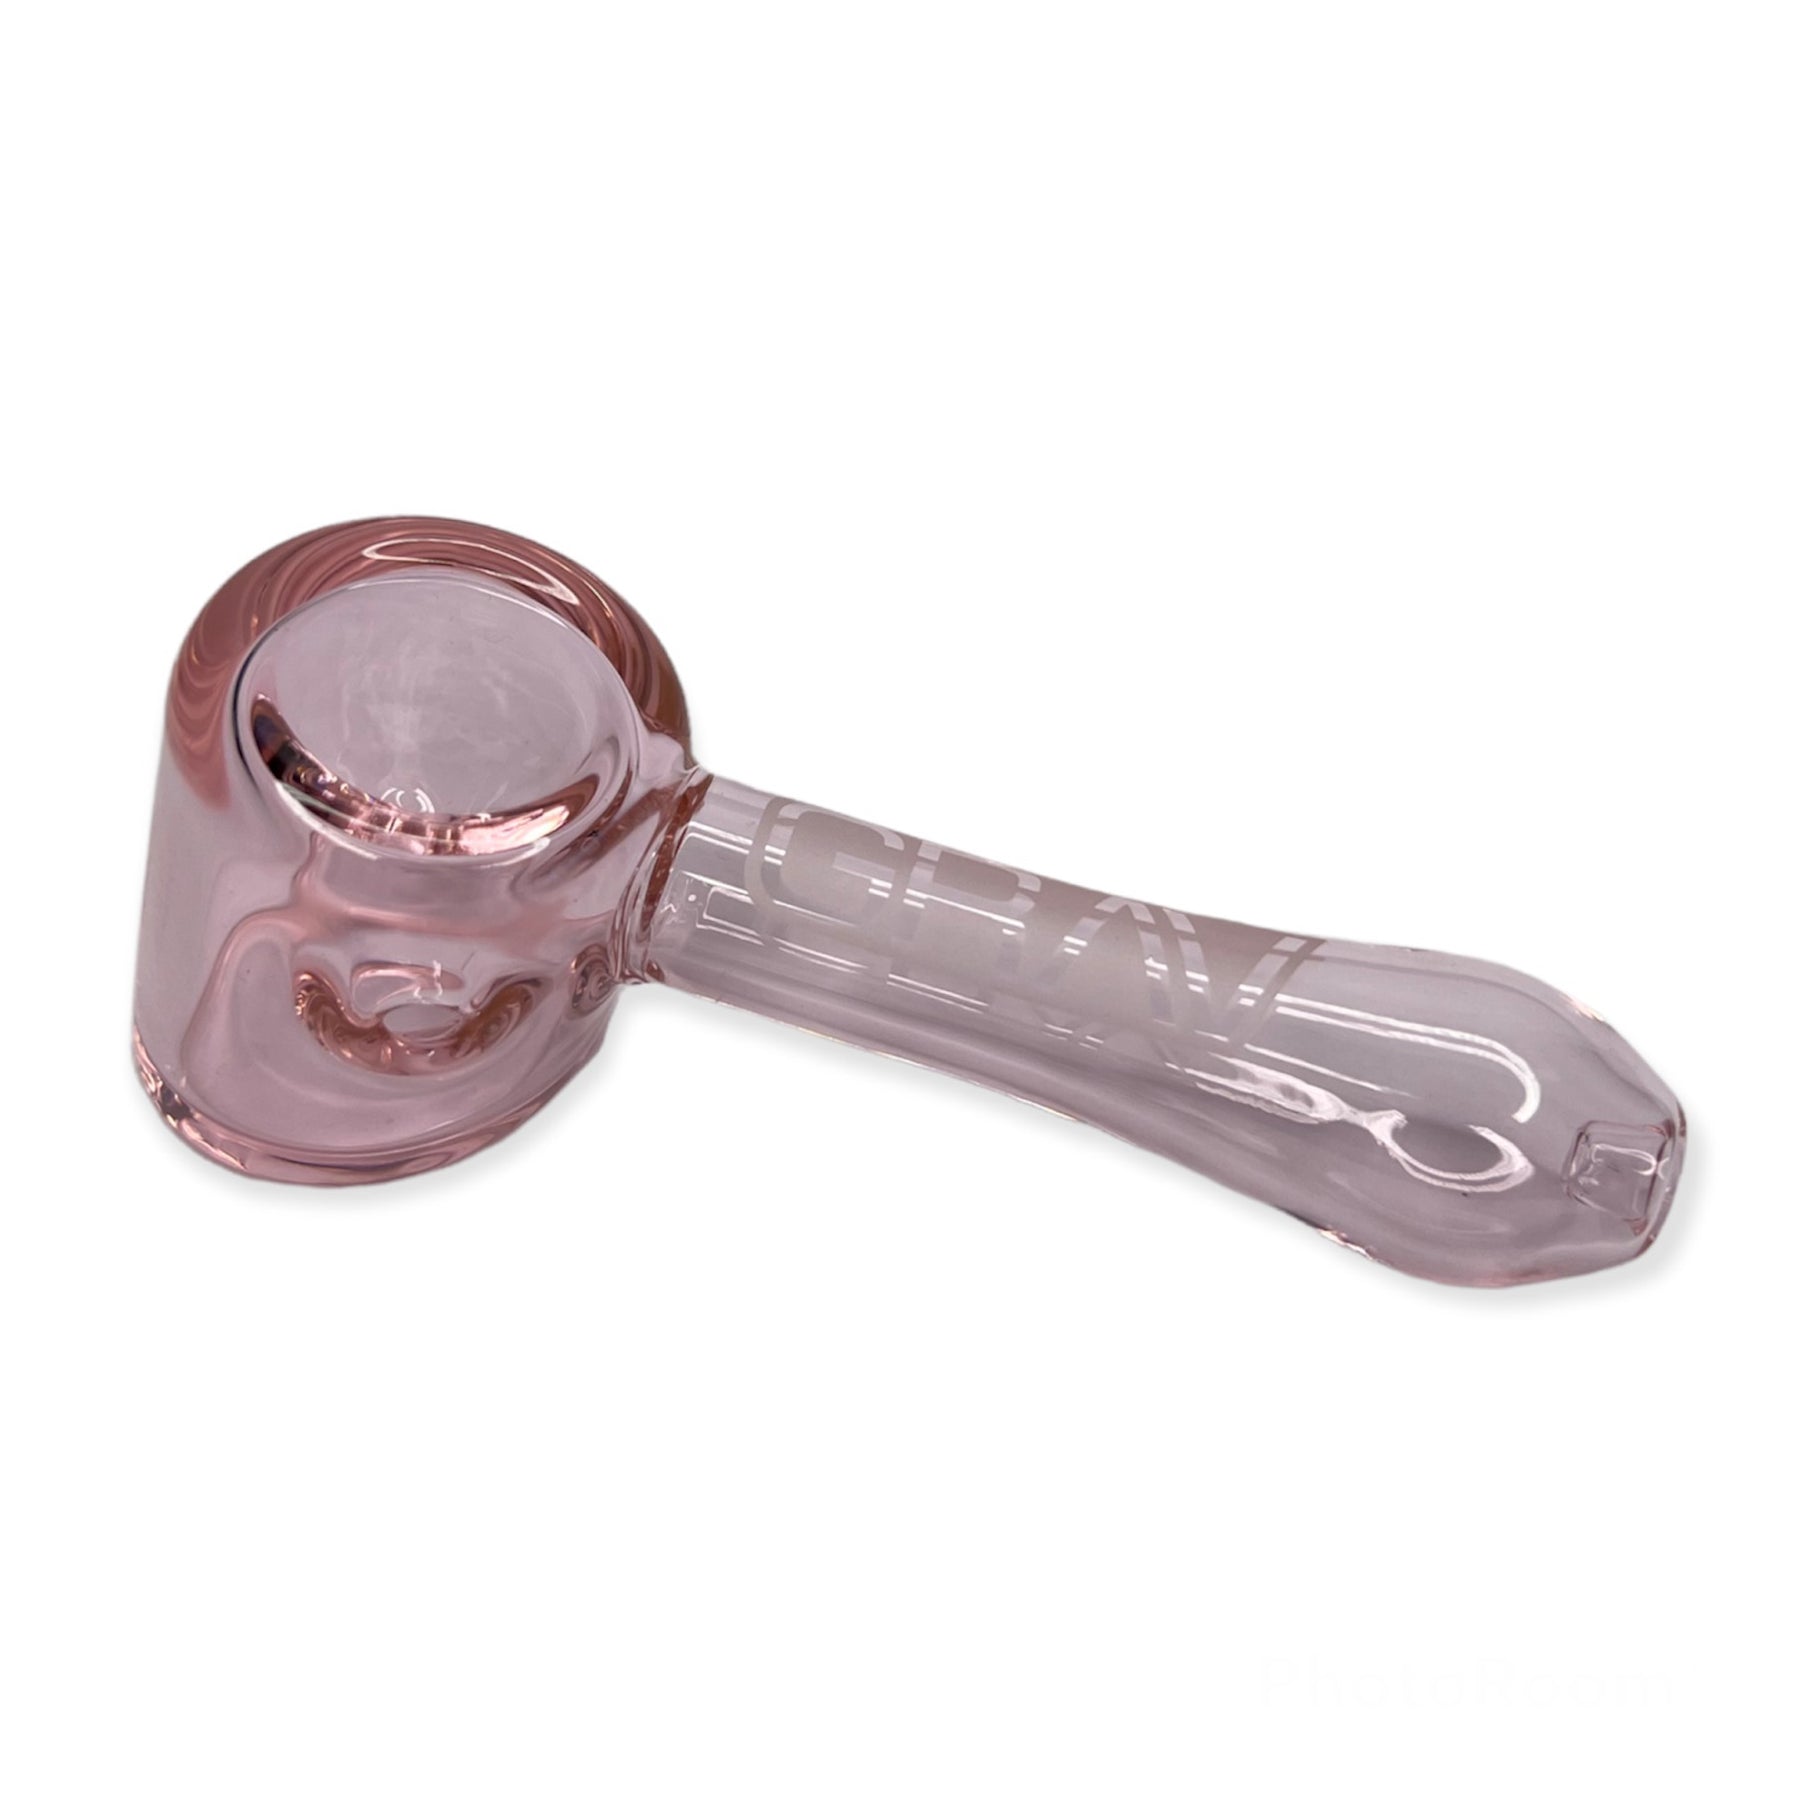 Pink colored nice pipe with big bowl